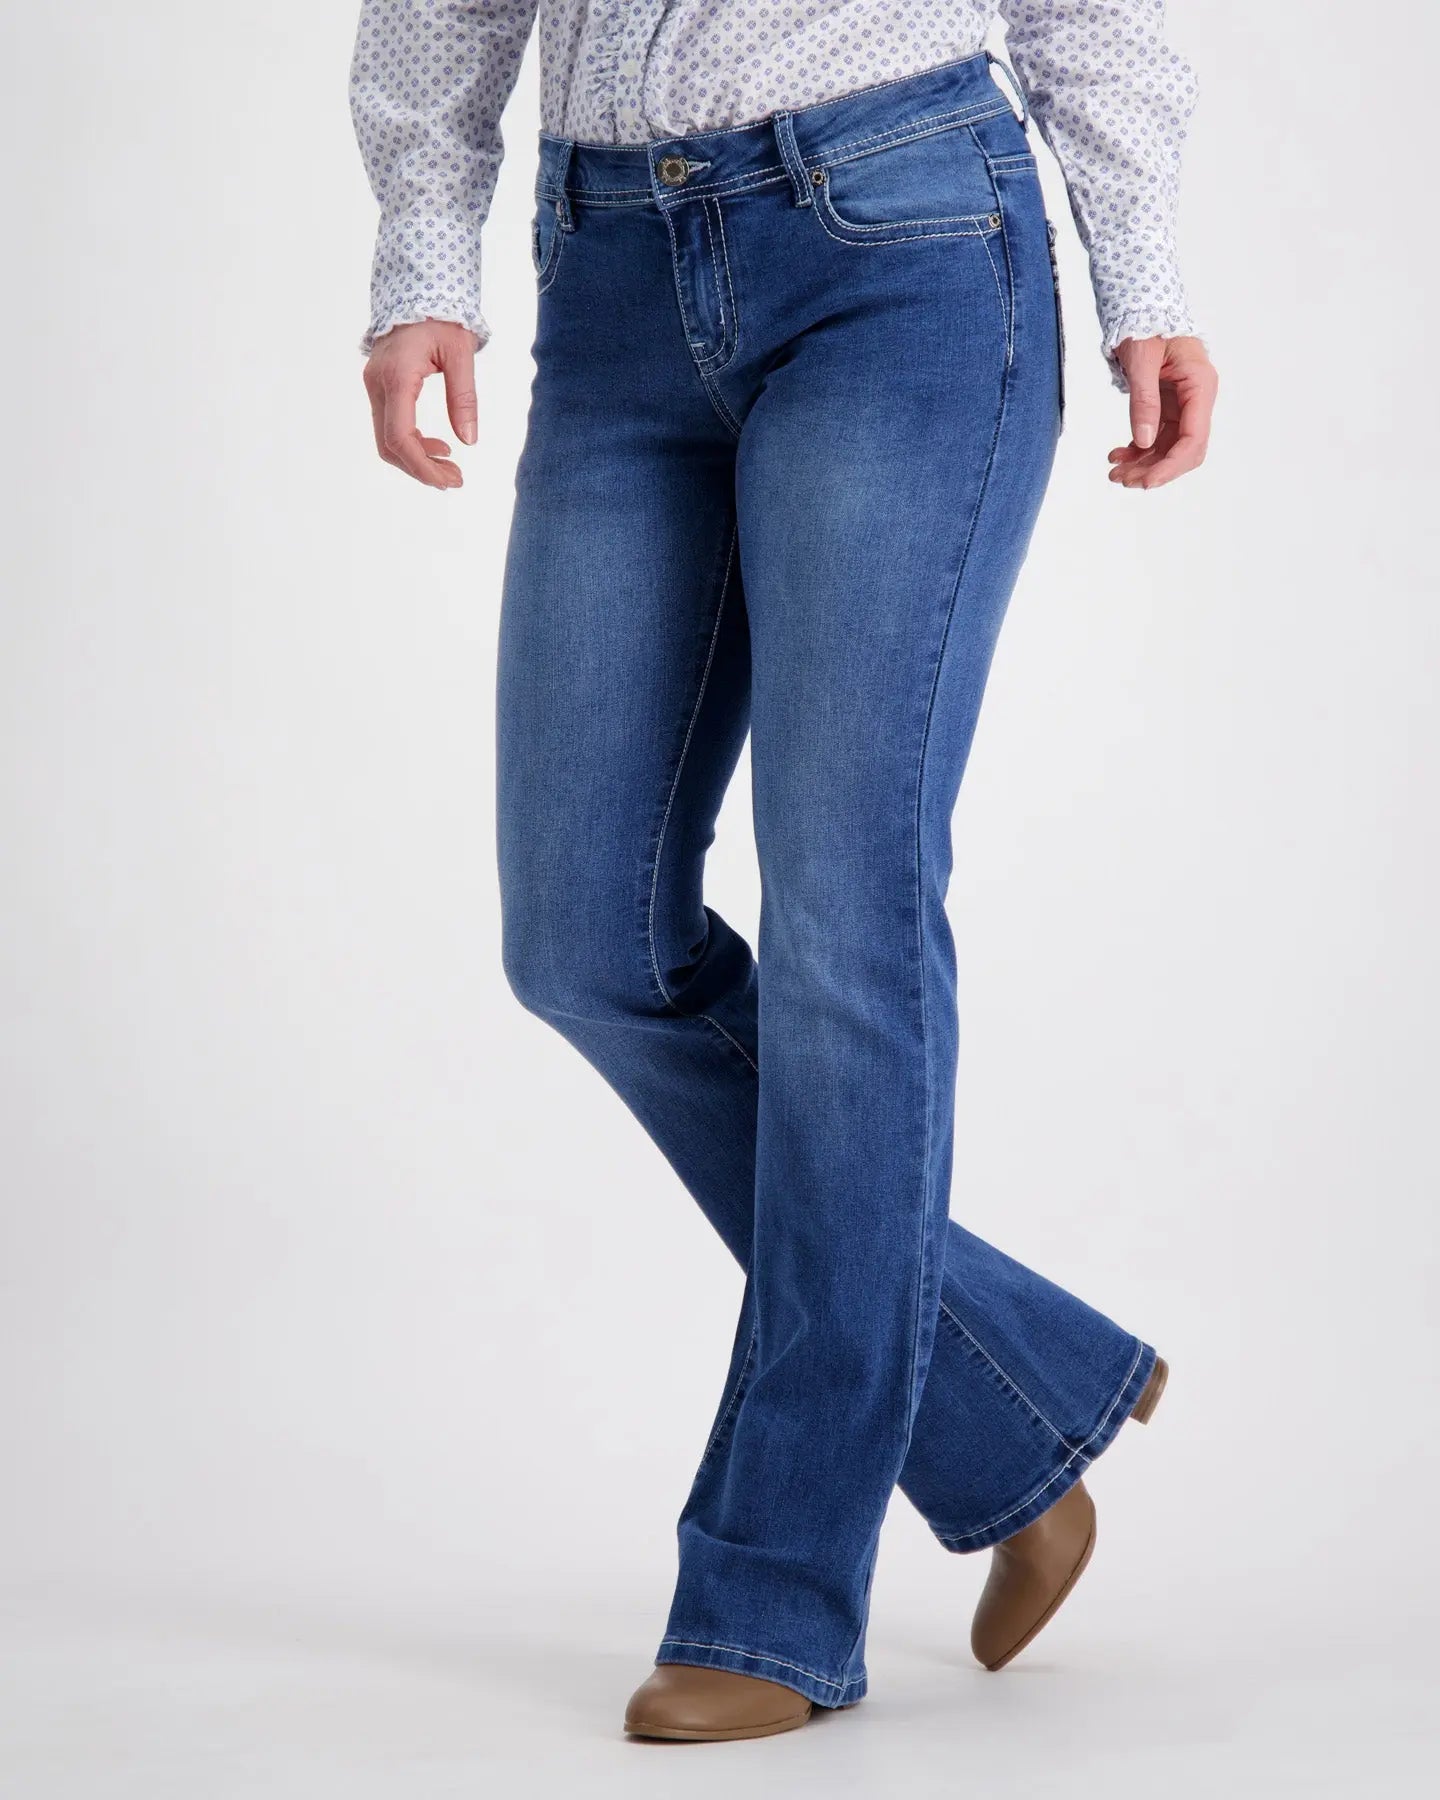 Boot-Cut denim Jeans Outback Supply Co